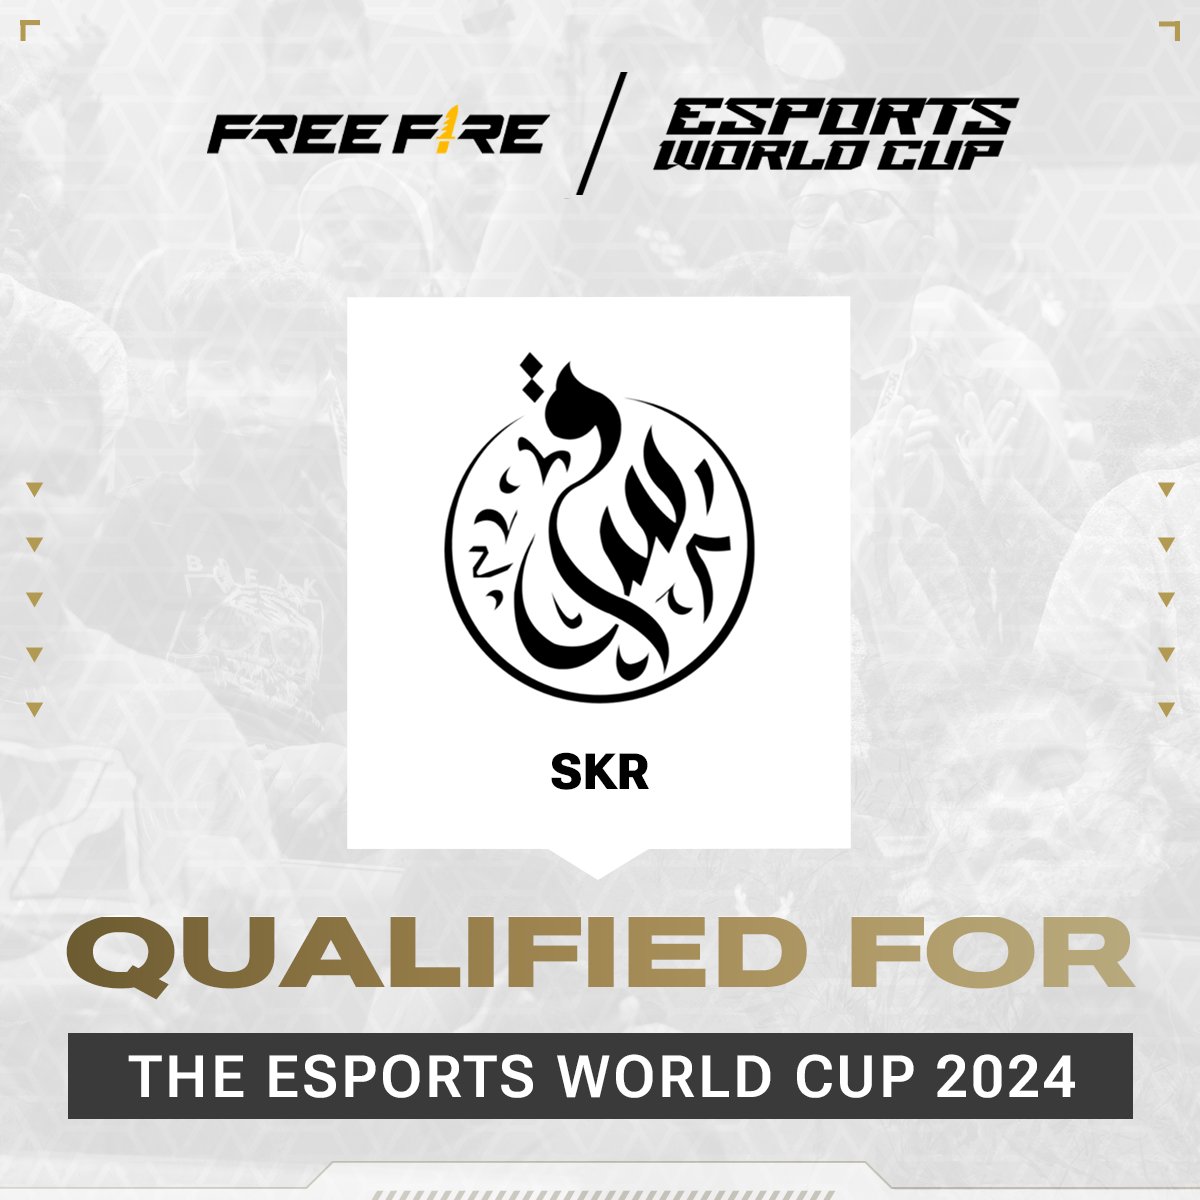 Welcome to the #EWC, SKR ‼️ Your excellent performance in the Mid-Season Clash has earned you a spot to the #FreeFire Esports World Cup 😎